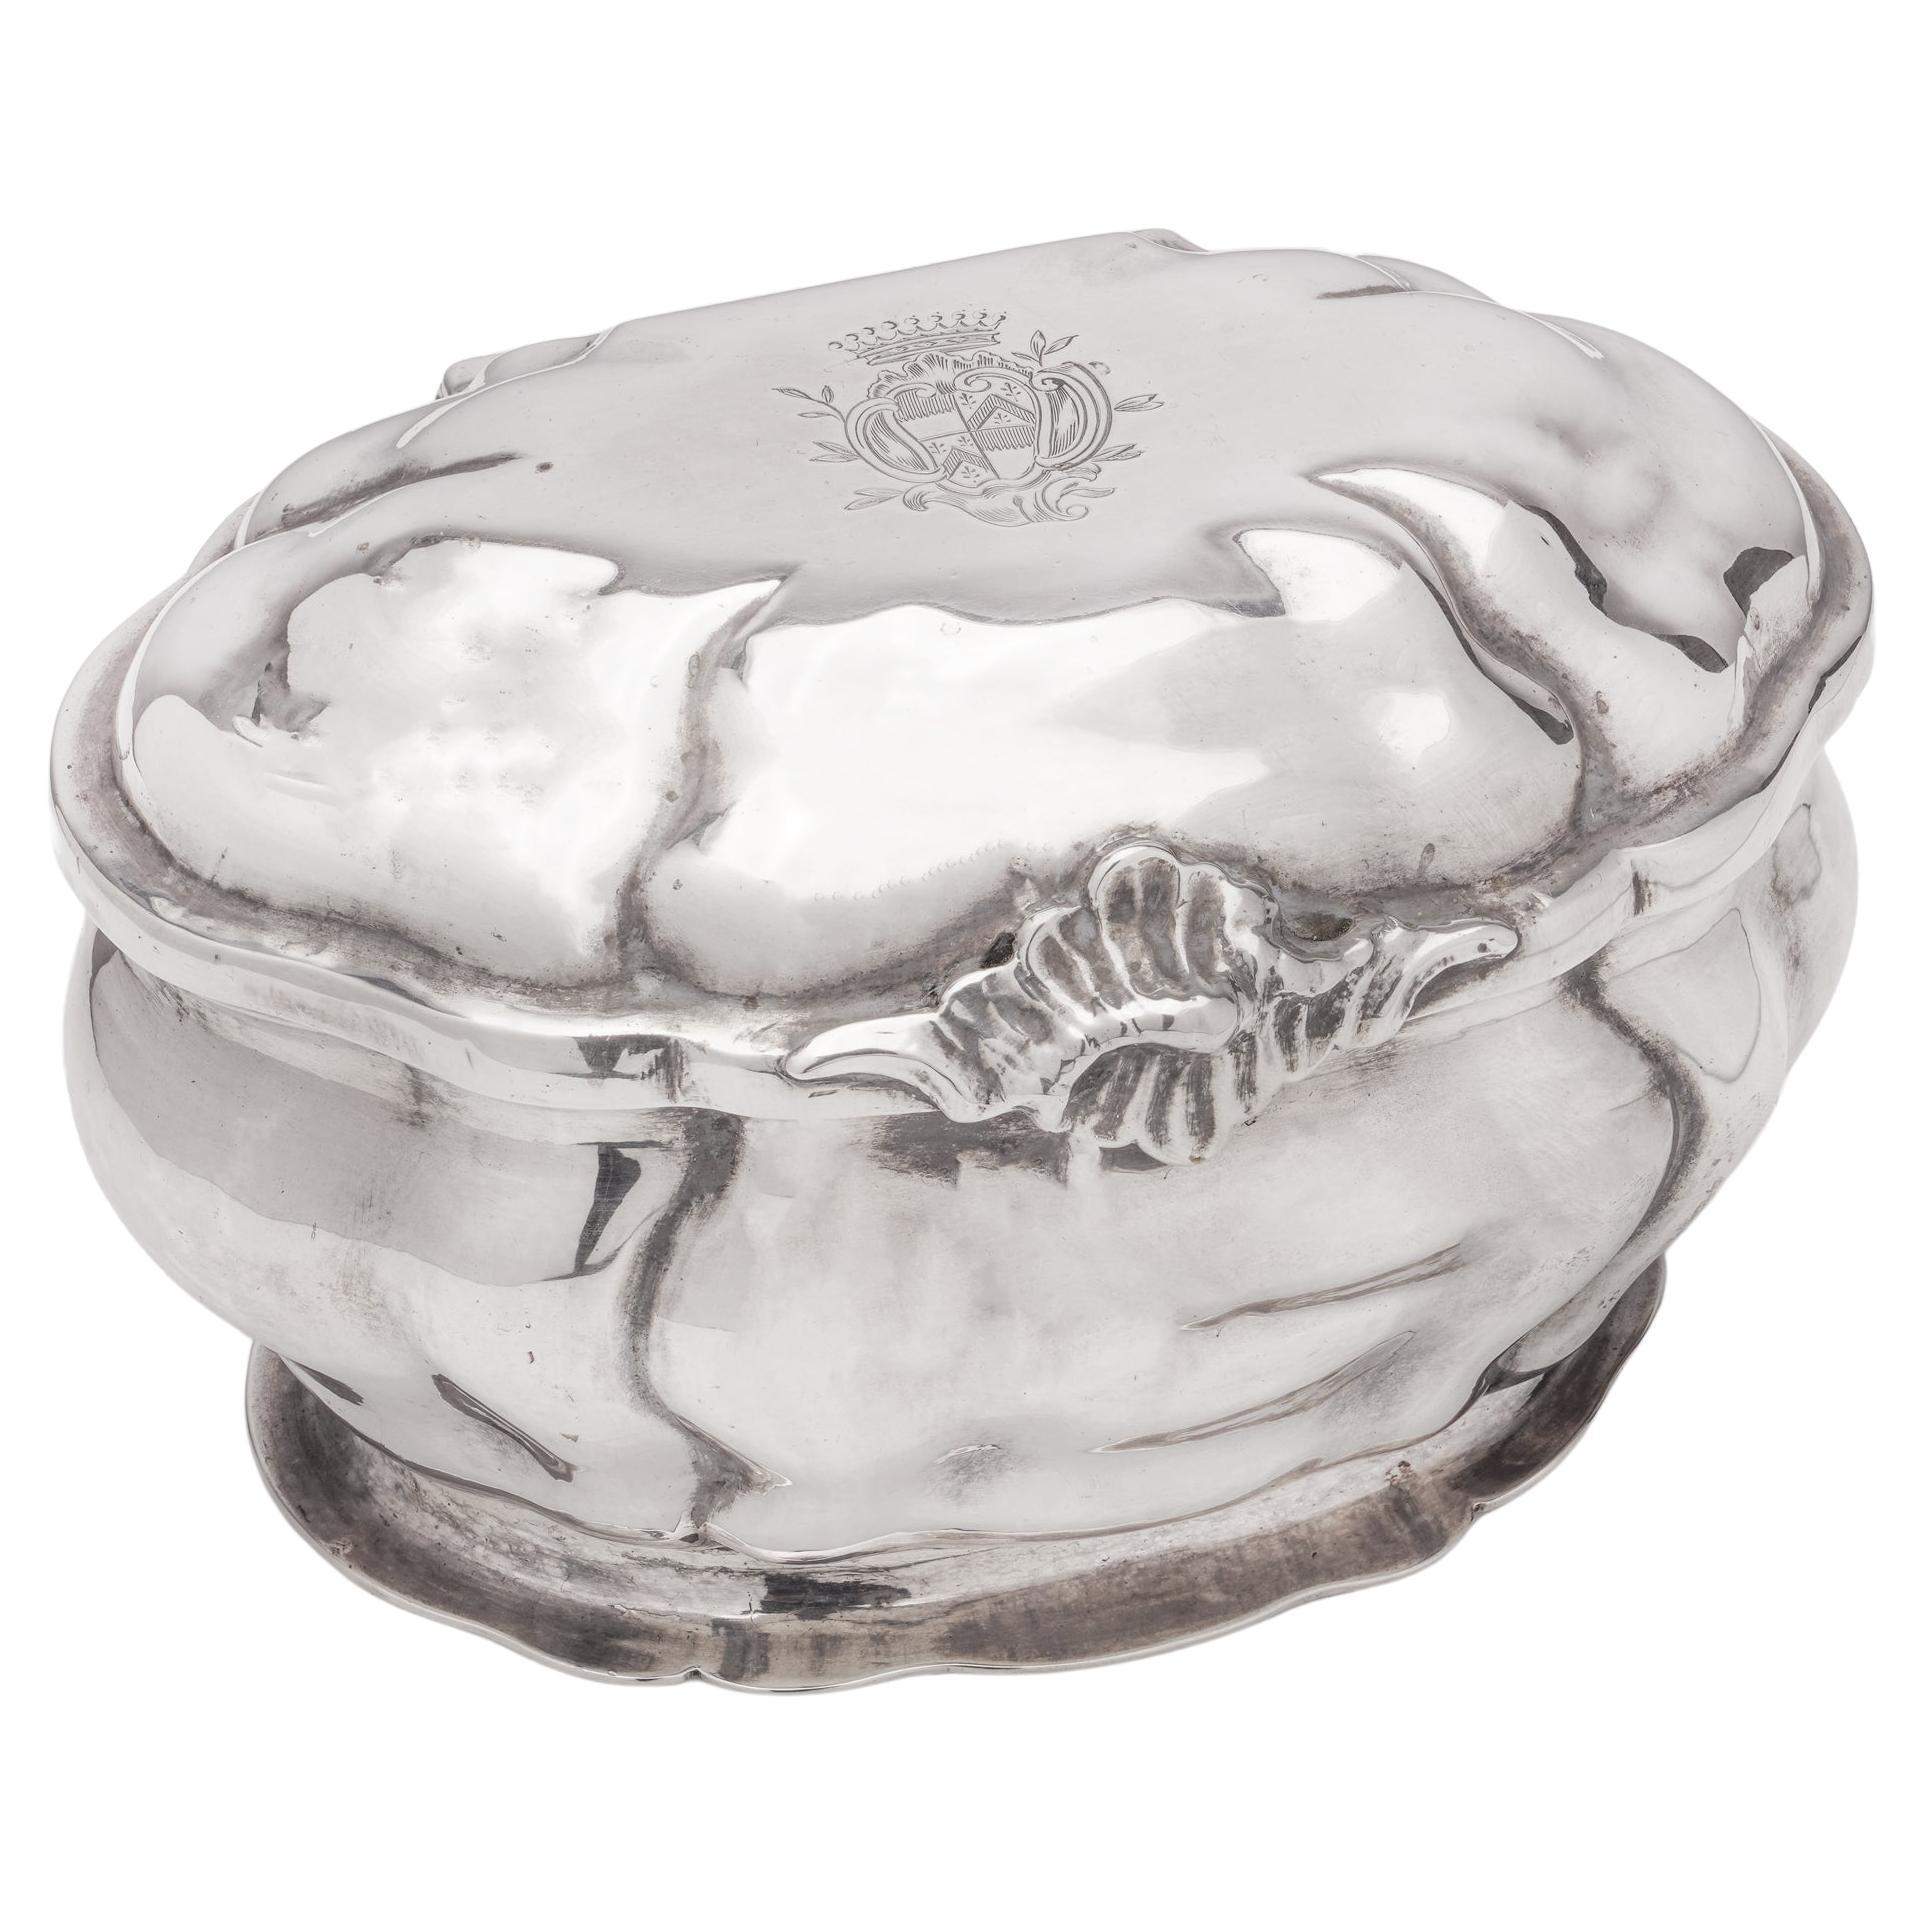 Antique 19th century 800. German silver small oval Tea Caddy with Hanau marks For Sale